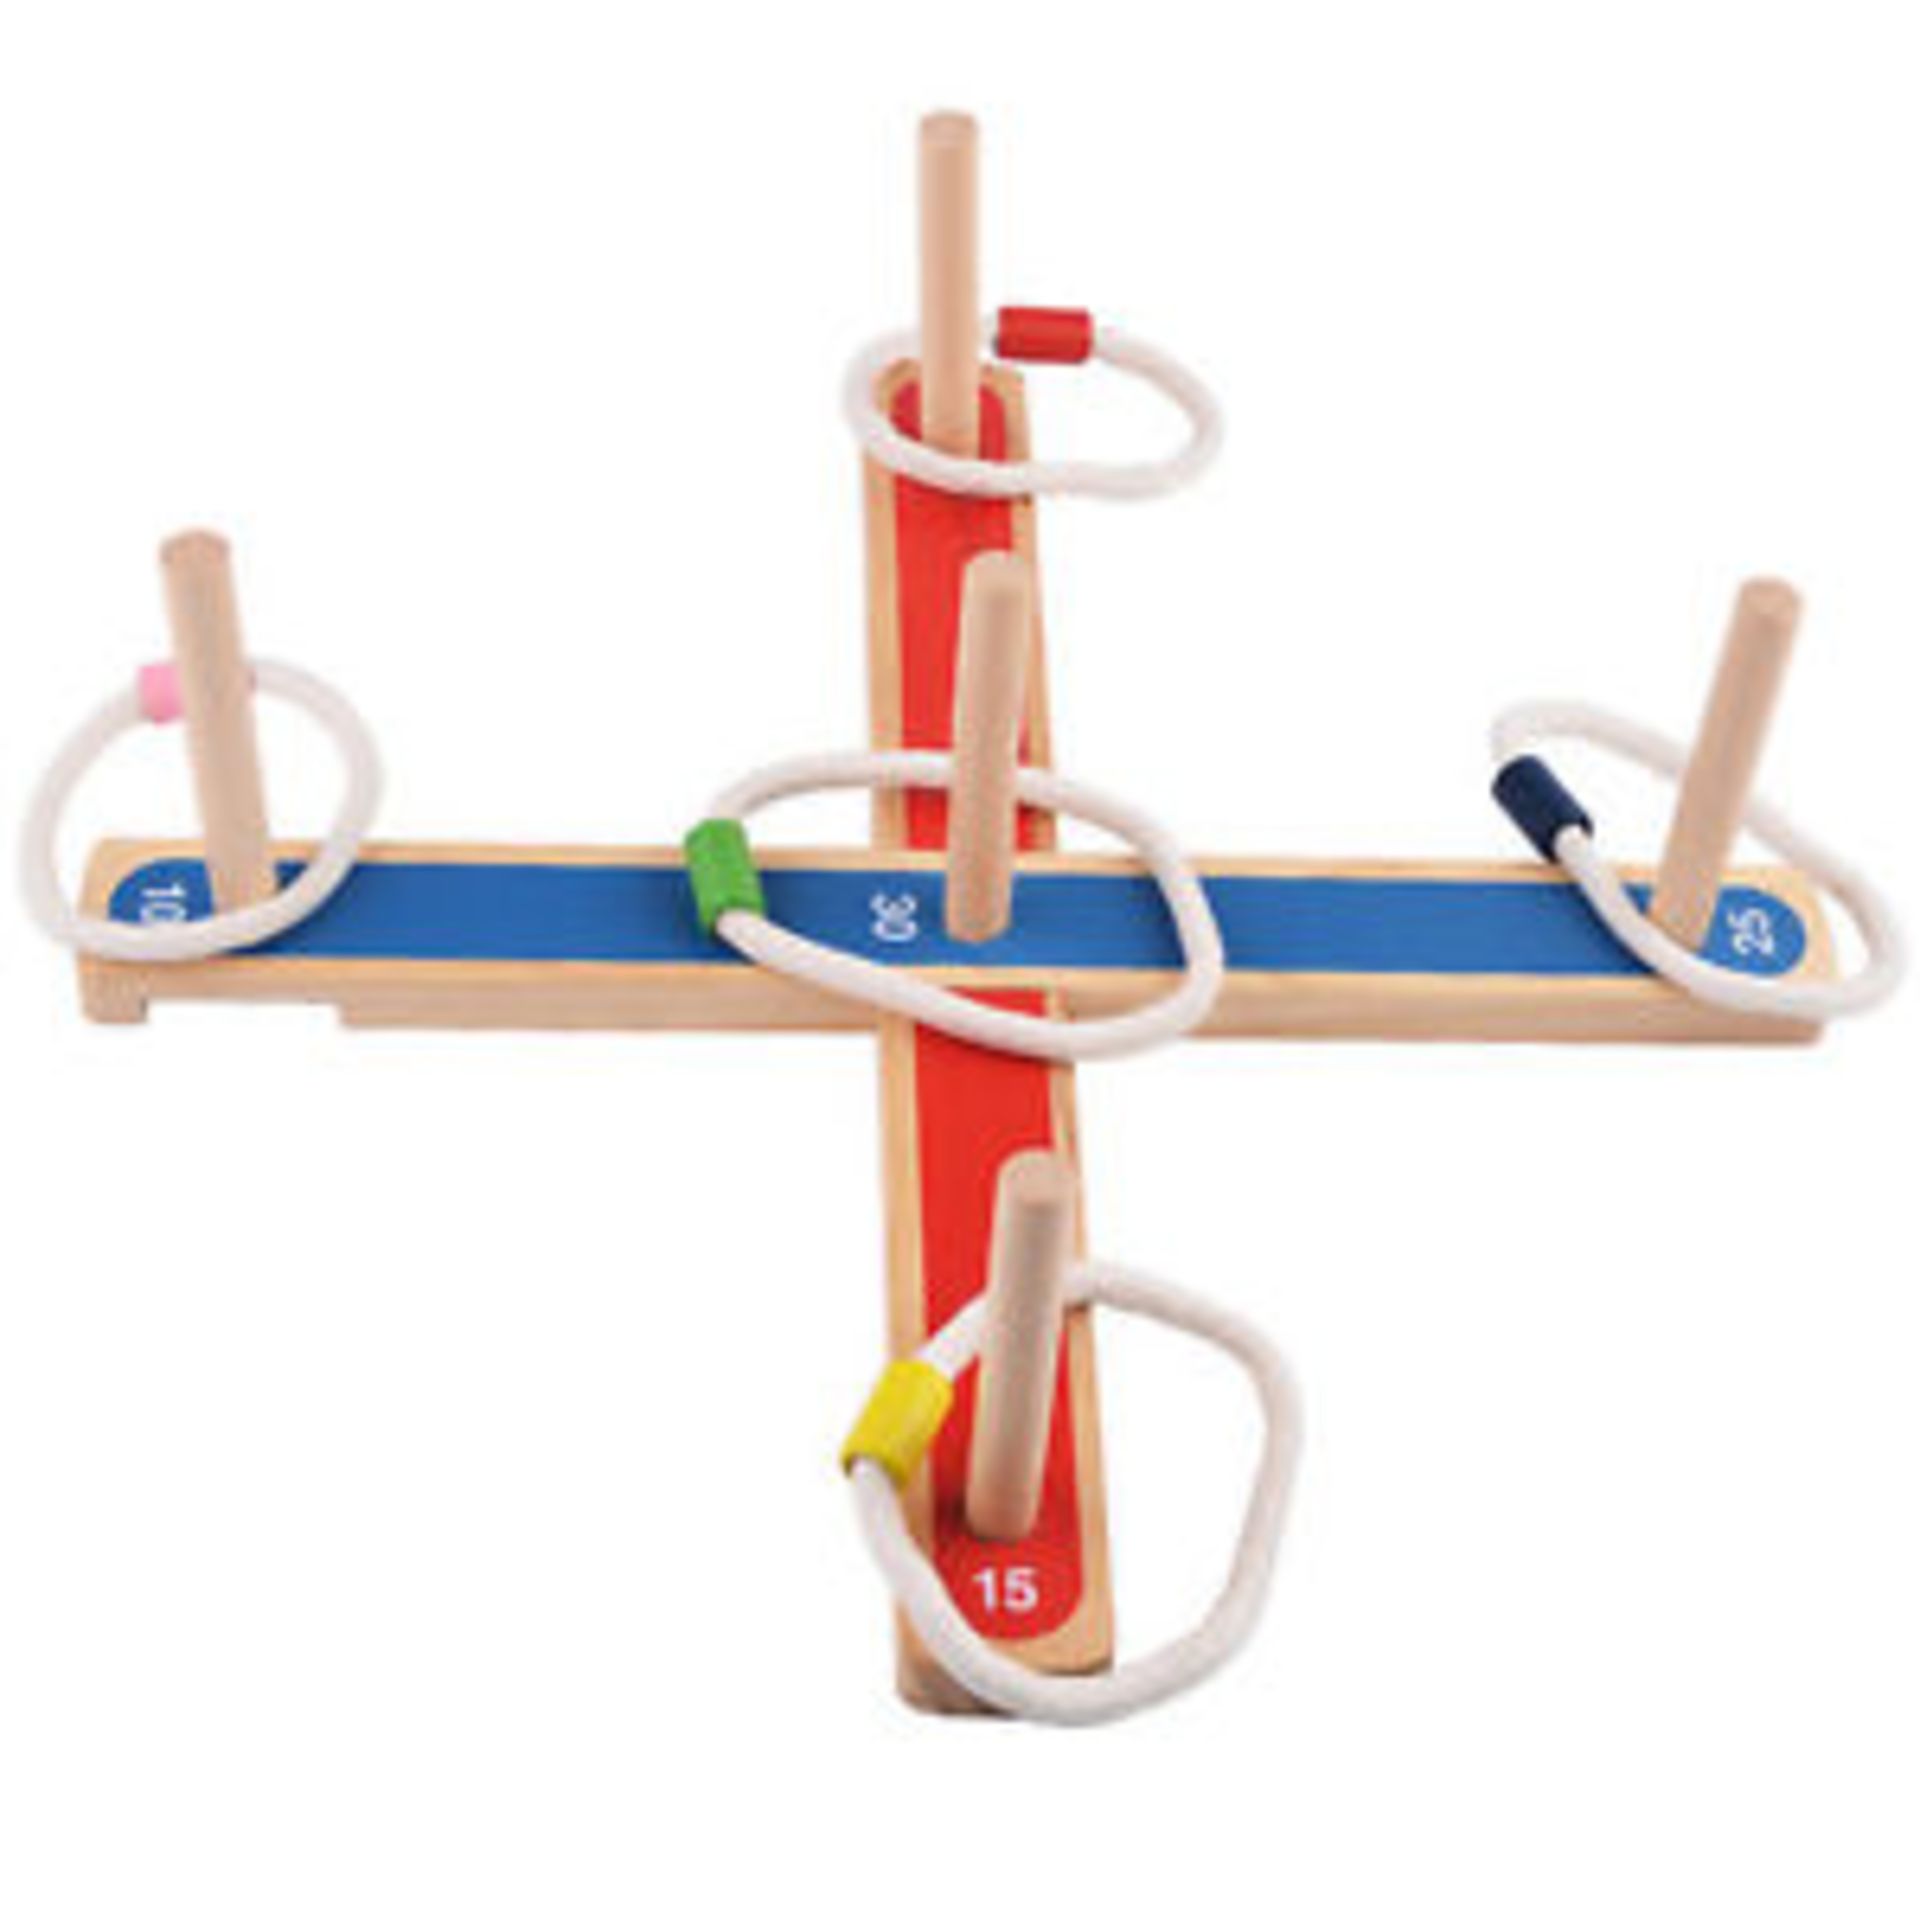 V Brand New Wooden Ring Toss Set (Image is Similar) X 2 YOUR BID PRICE TO BE MULTIPLIED BY TWO